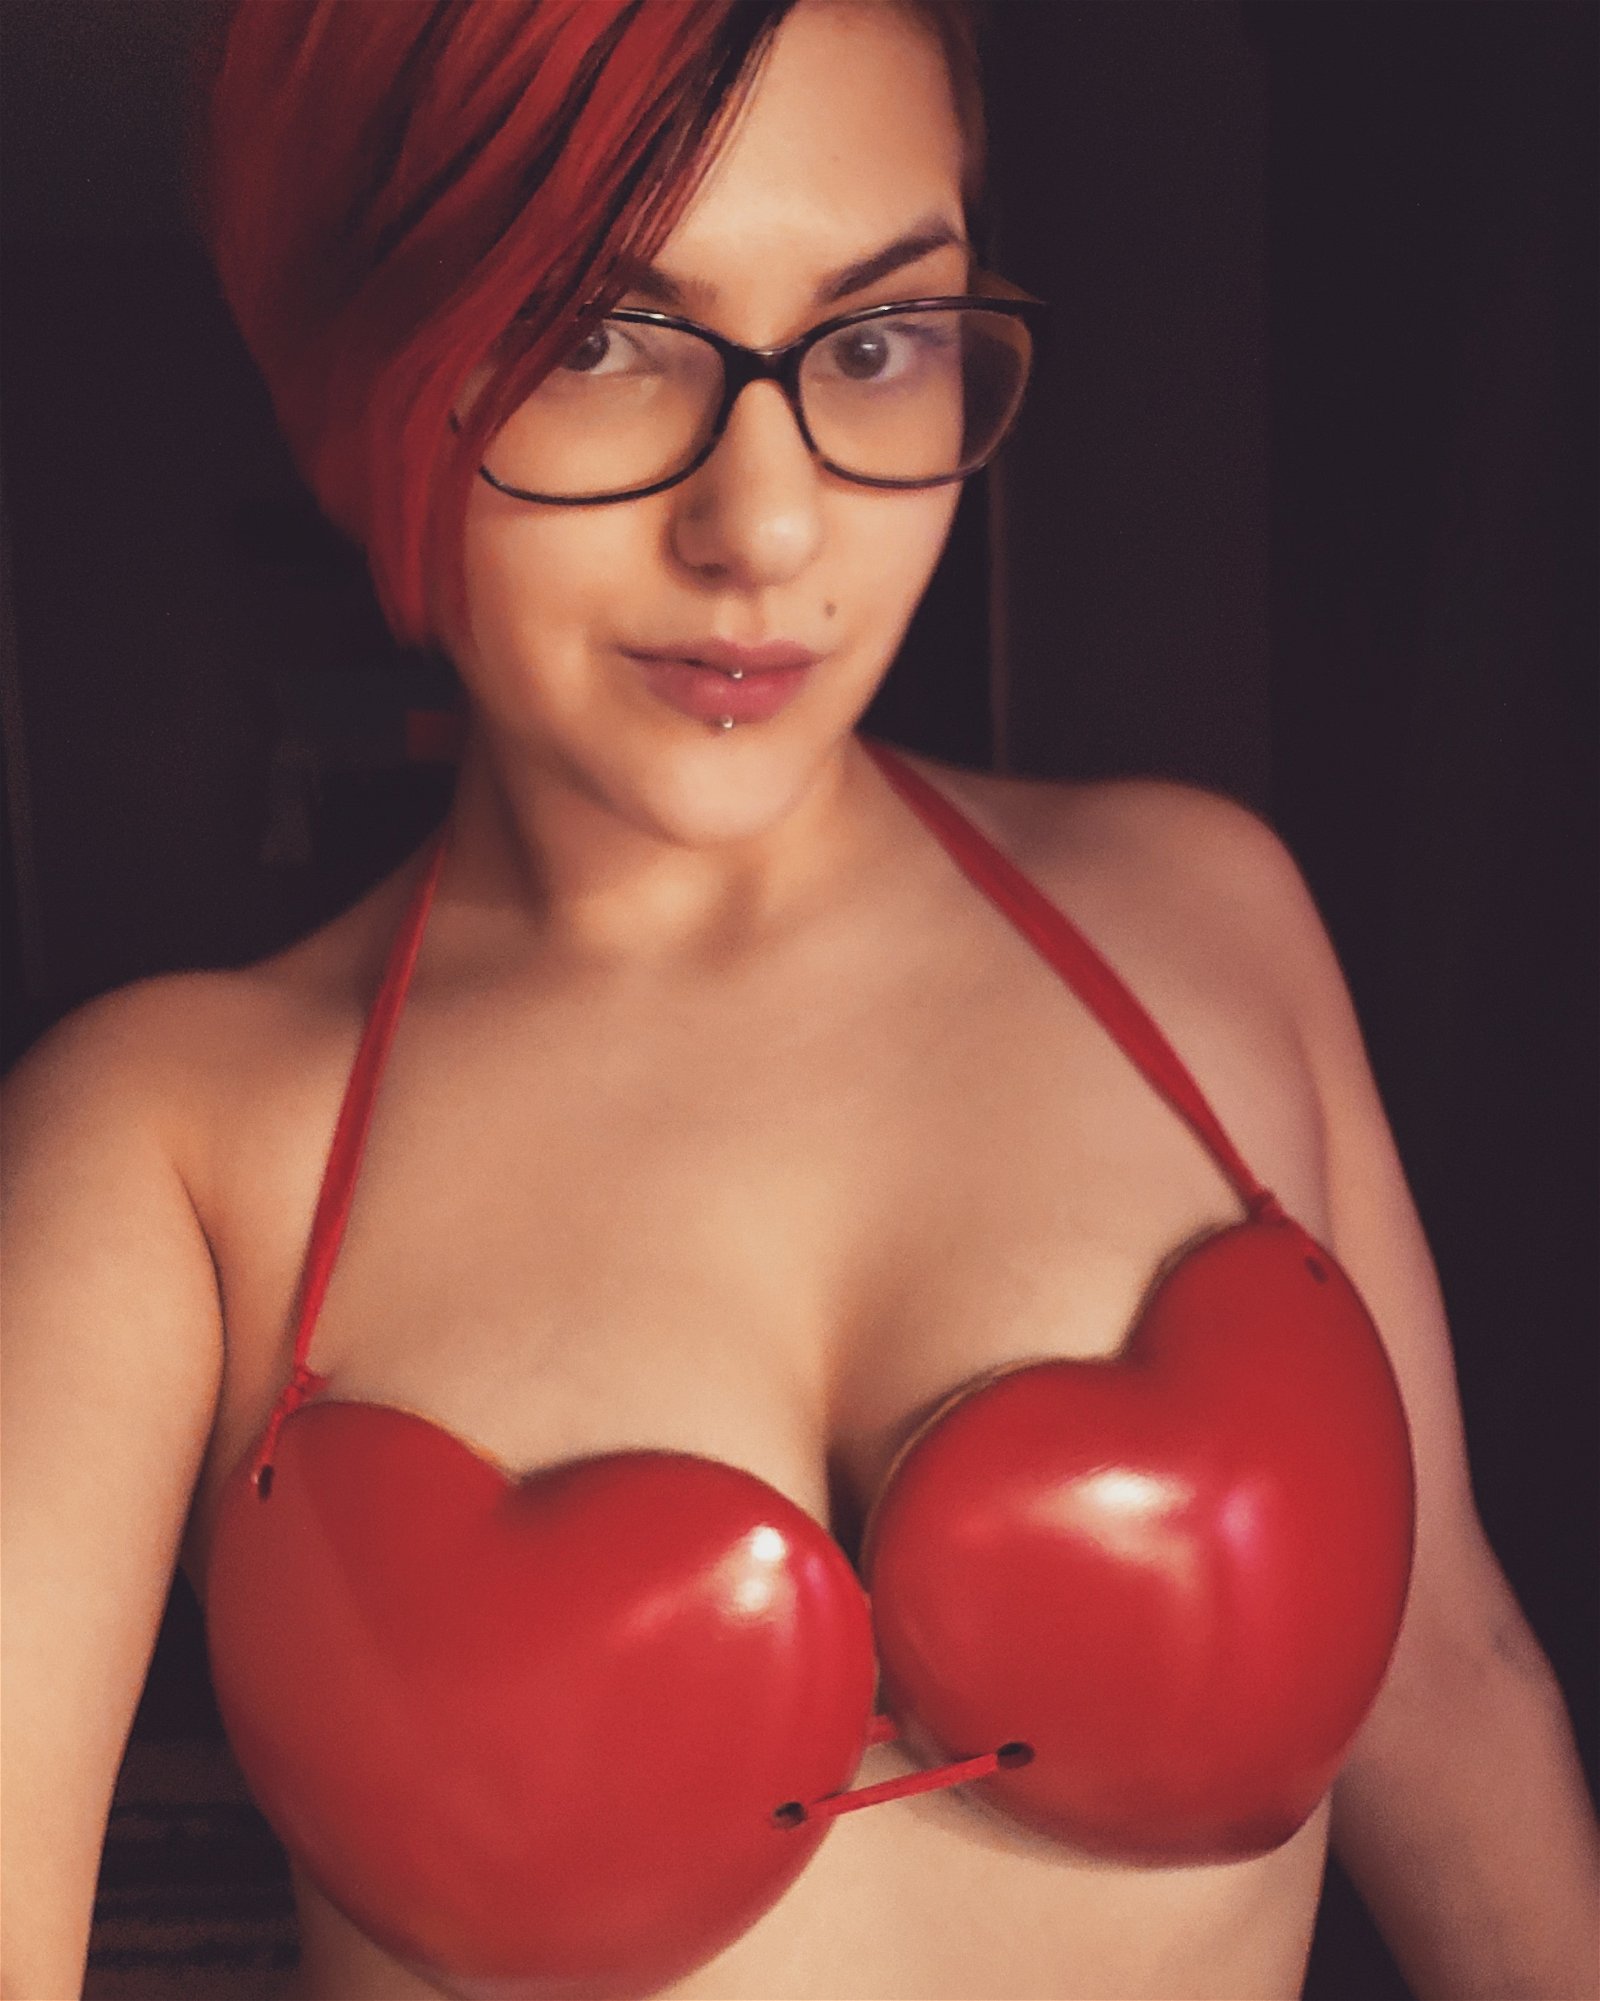 Photo by SynthetikaCosplay with the username @SynthetikaCosplay, who is a star user,  December 11, 2018 at 6:23 AM. The post is about the topic Busty Chicks and the text says 'I just HAD to try on the heart bra I received from Geek Crafters. I love it 😍😍😍

#cosplayer #cosplaygirl #cosplaybabe #cosplaymodel #alternativegirl #alternativemodel #fetishgirl #fetishmodel #cosplaylife #geekcrafters #heart #heartboobs #geekgirl..'